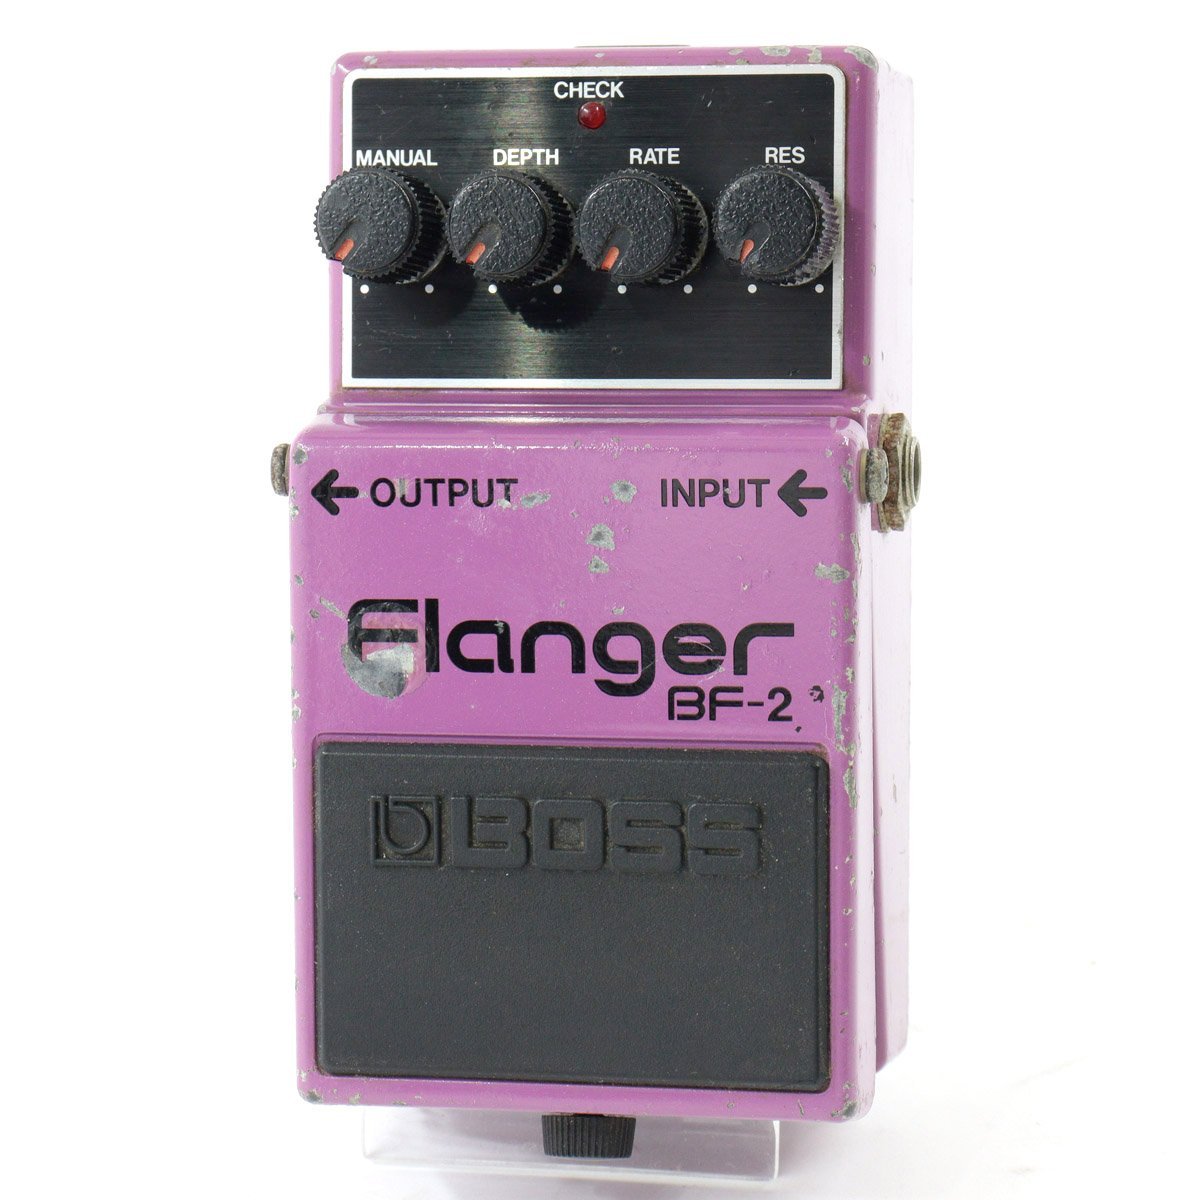 BOSS BF-2 Flanger / Made in Japan 1986年製 ACA仕様 ギター用 